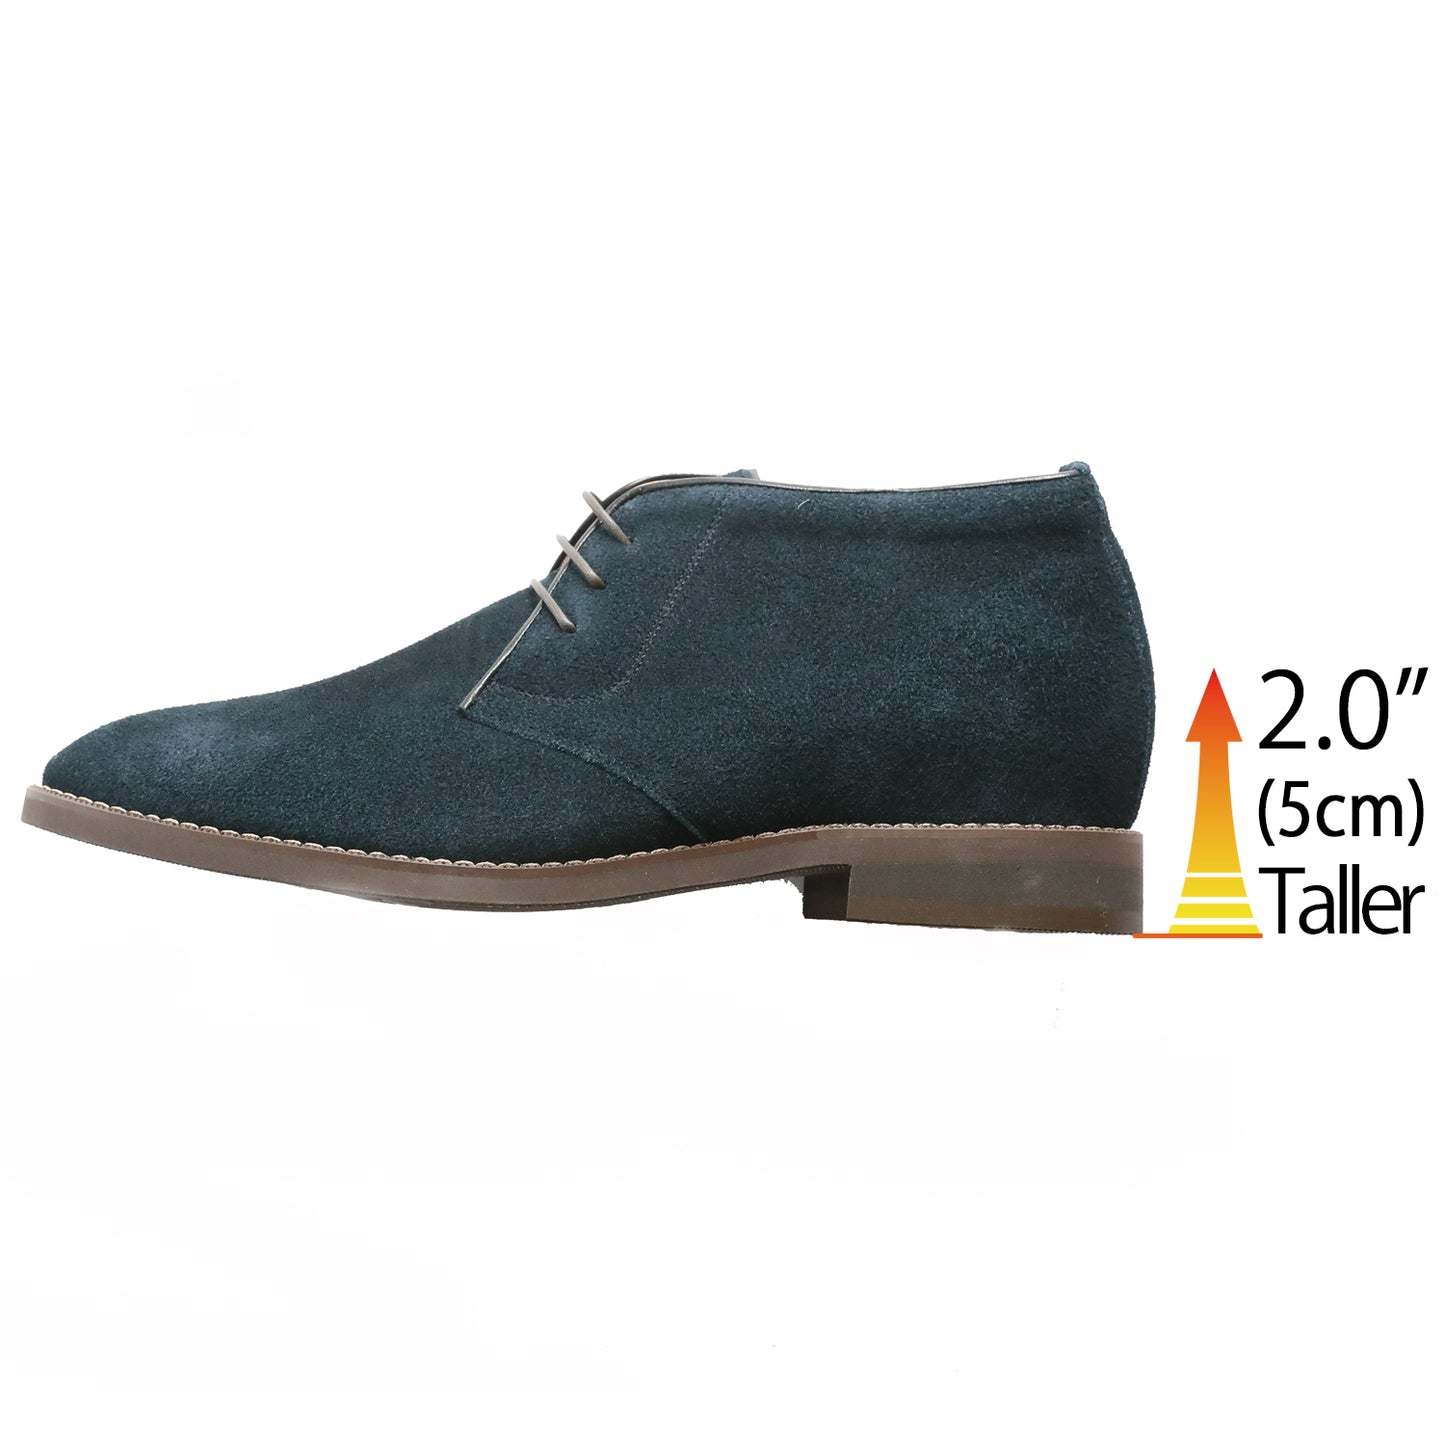 Men's Elevator Shoes Height Increasing 2" Taller Chukka Boots Velour Leather Ankle Boots No. 850